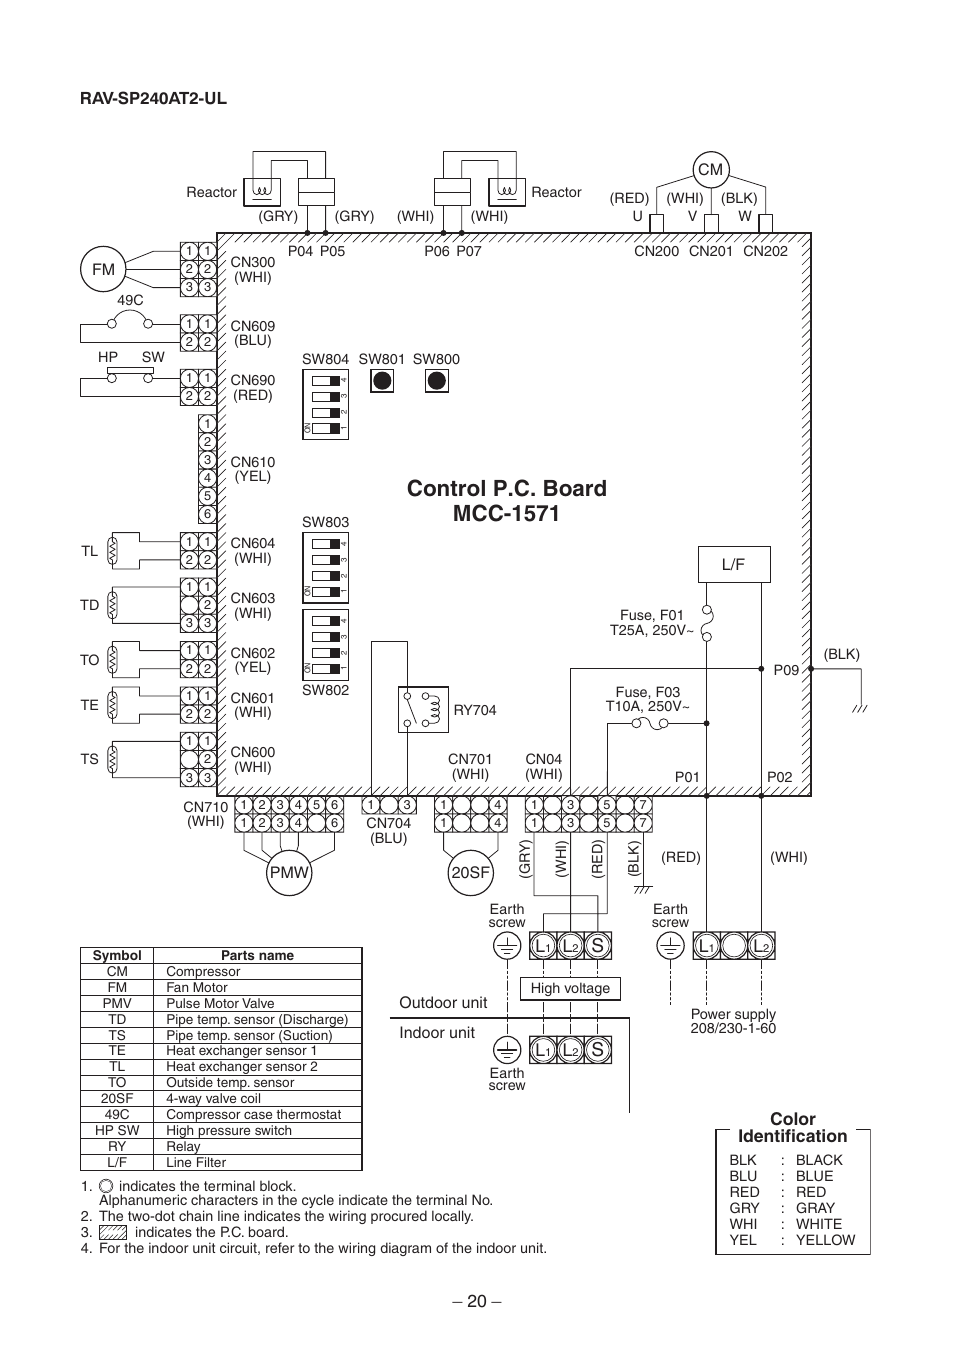 Control p.c. board mcc-1571, Color identification | Toshiba CARRIER RAV-SP300AT2-UL User Manual | Page 20 / 116